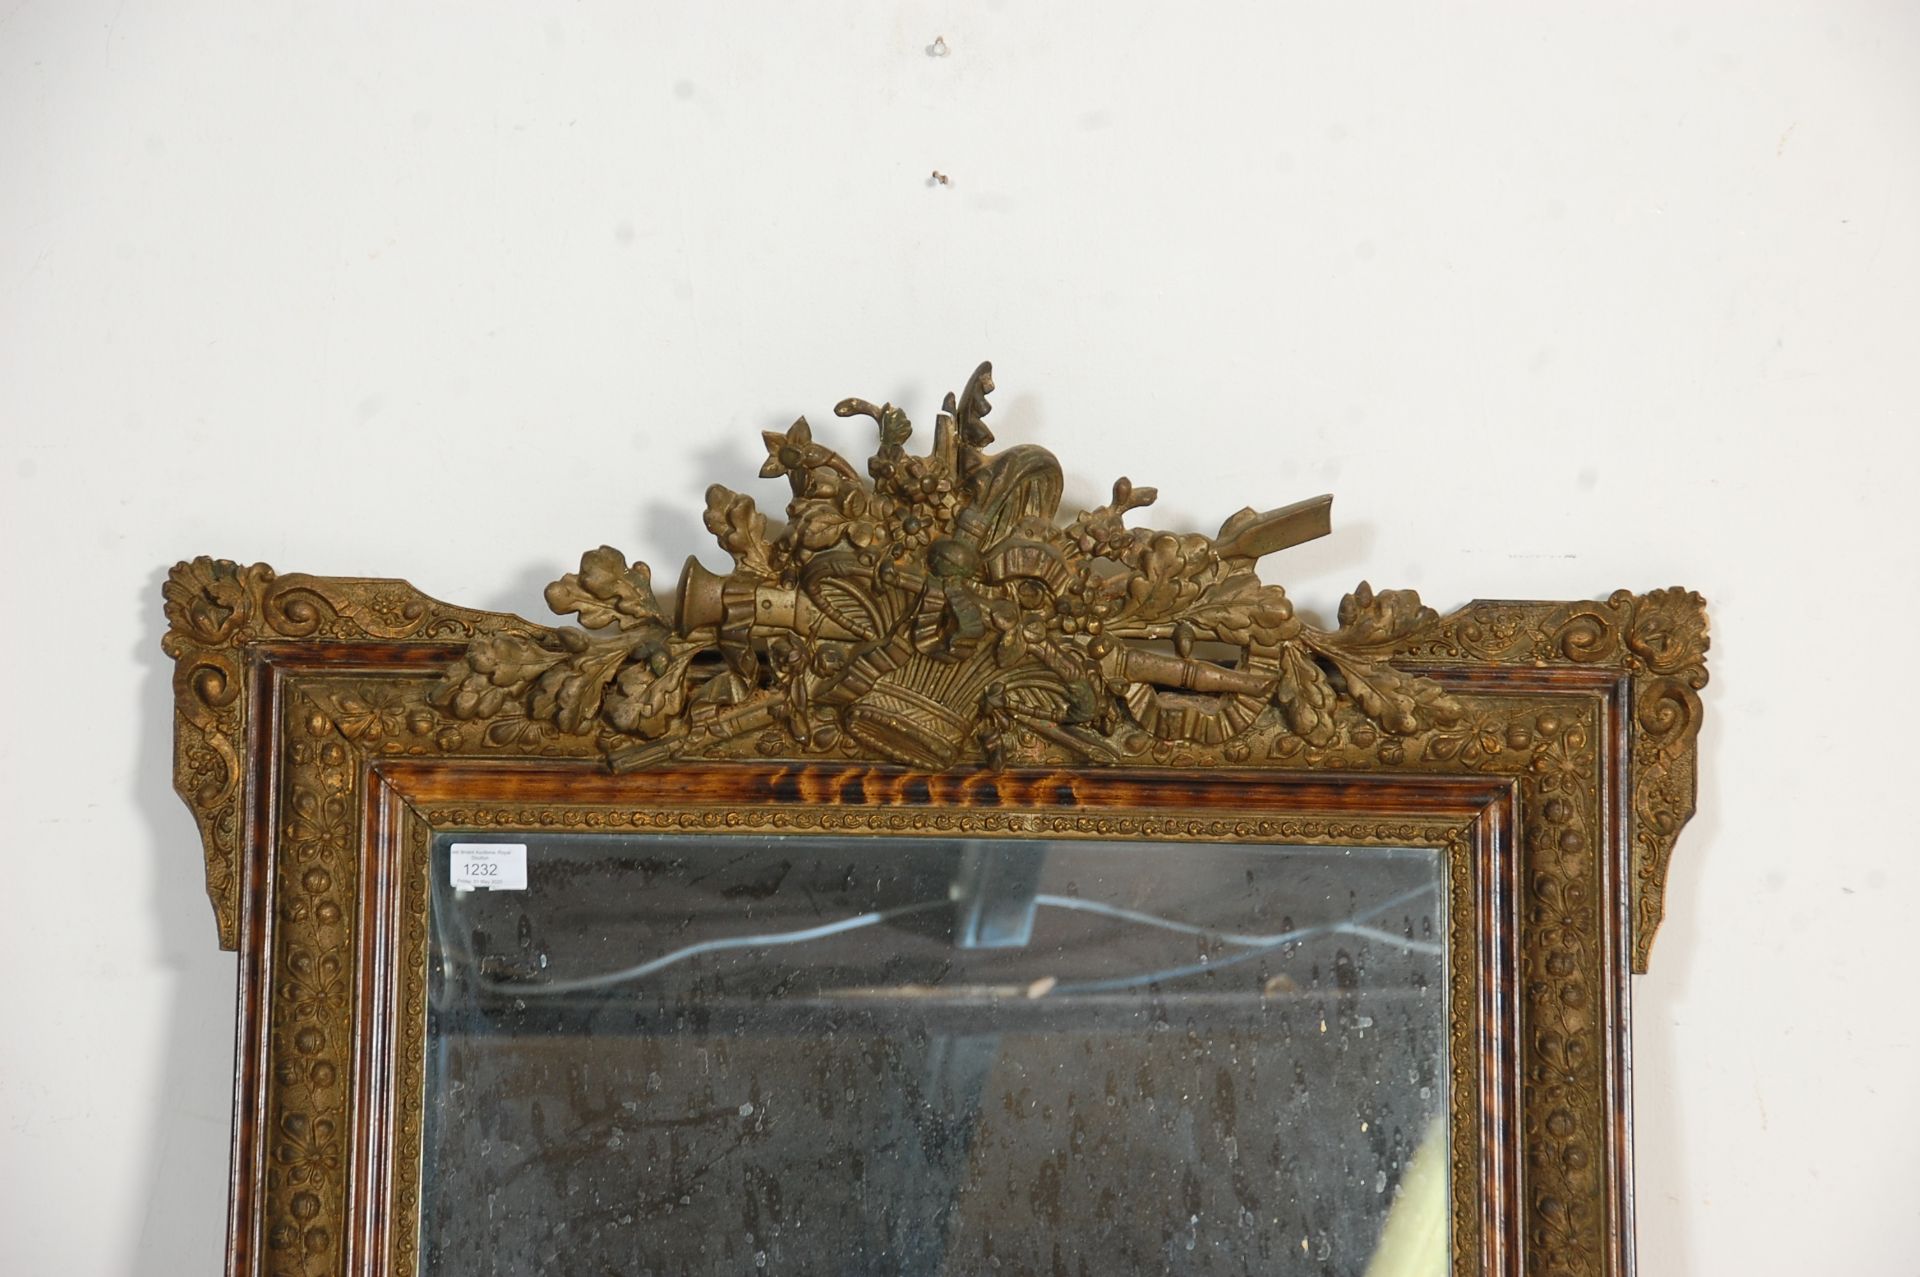 19TH CENTURY FRENCH WALL MIRROR IN GILT FRAME - Image 2 of 5